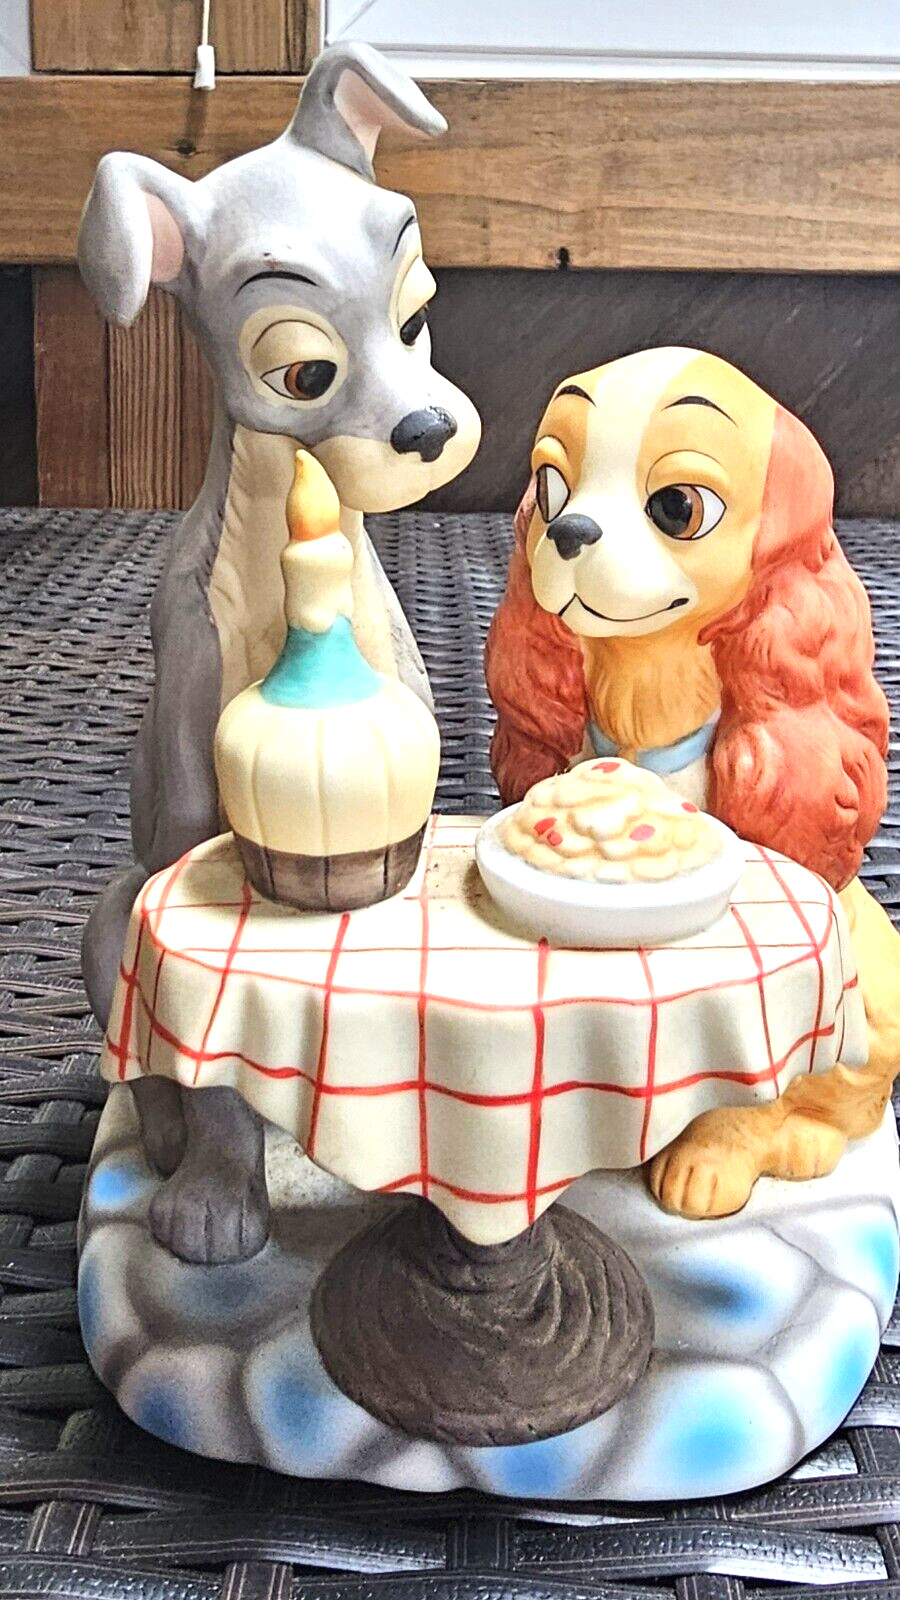 VINTAGE WALT DISNEY PRODUCTIONS LADY AND THE TRAMP FIGURINE